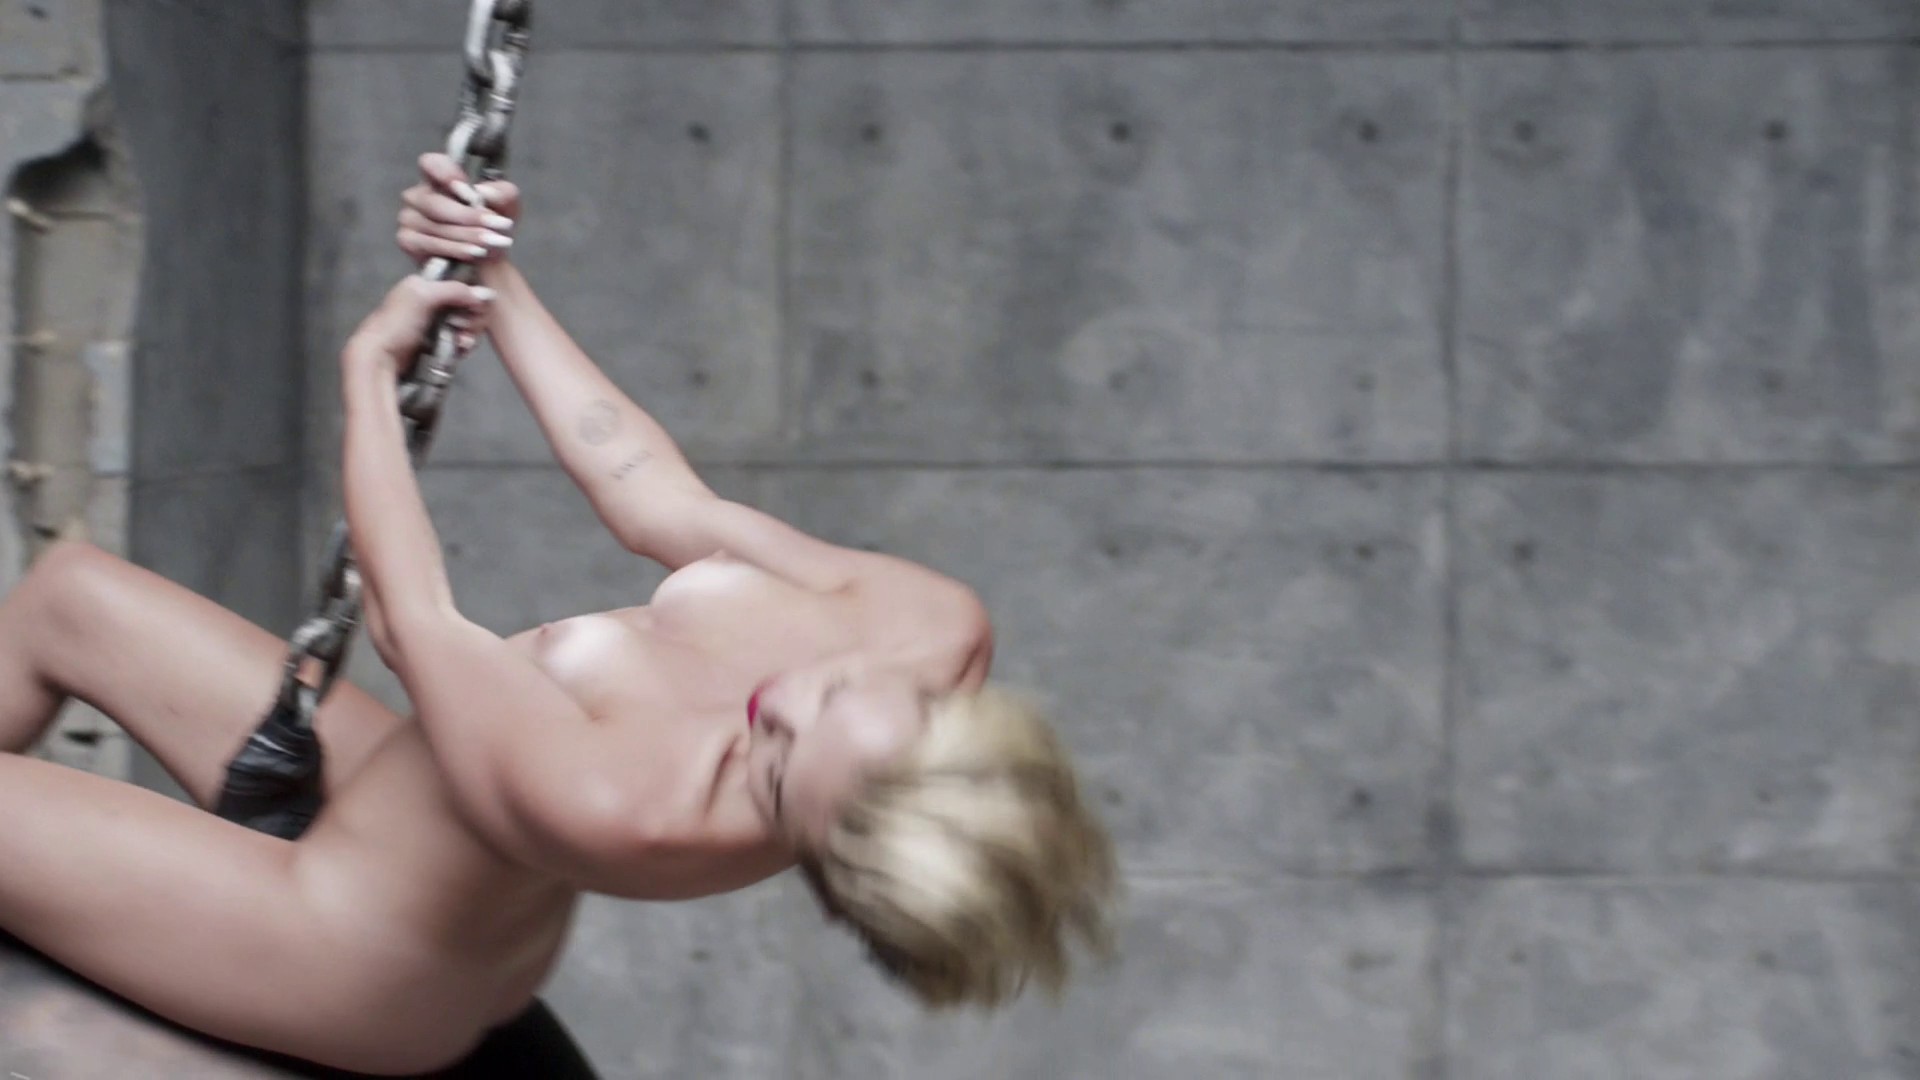 Miley Cyrus - Wrecking Ball explicit uncensored video 1080p2711.jpg